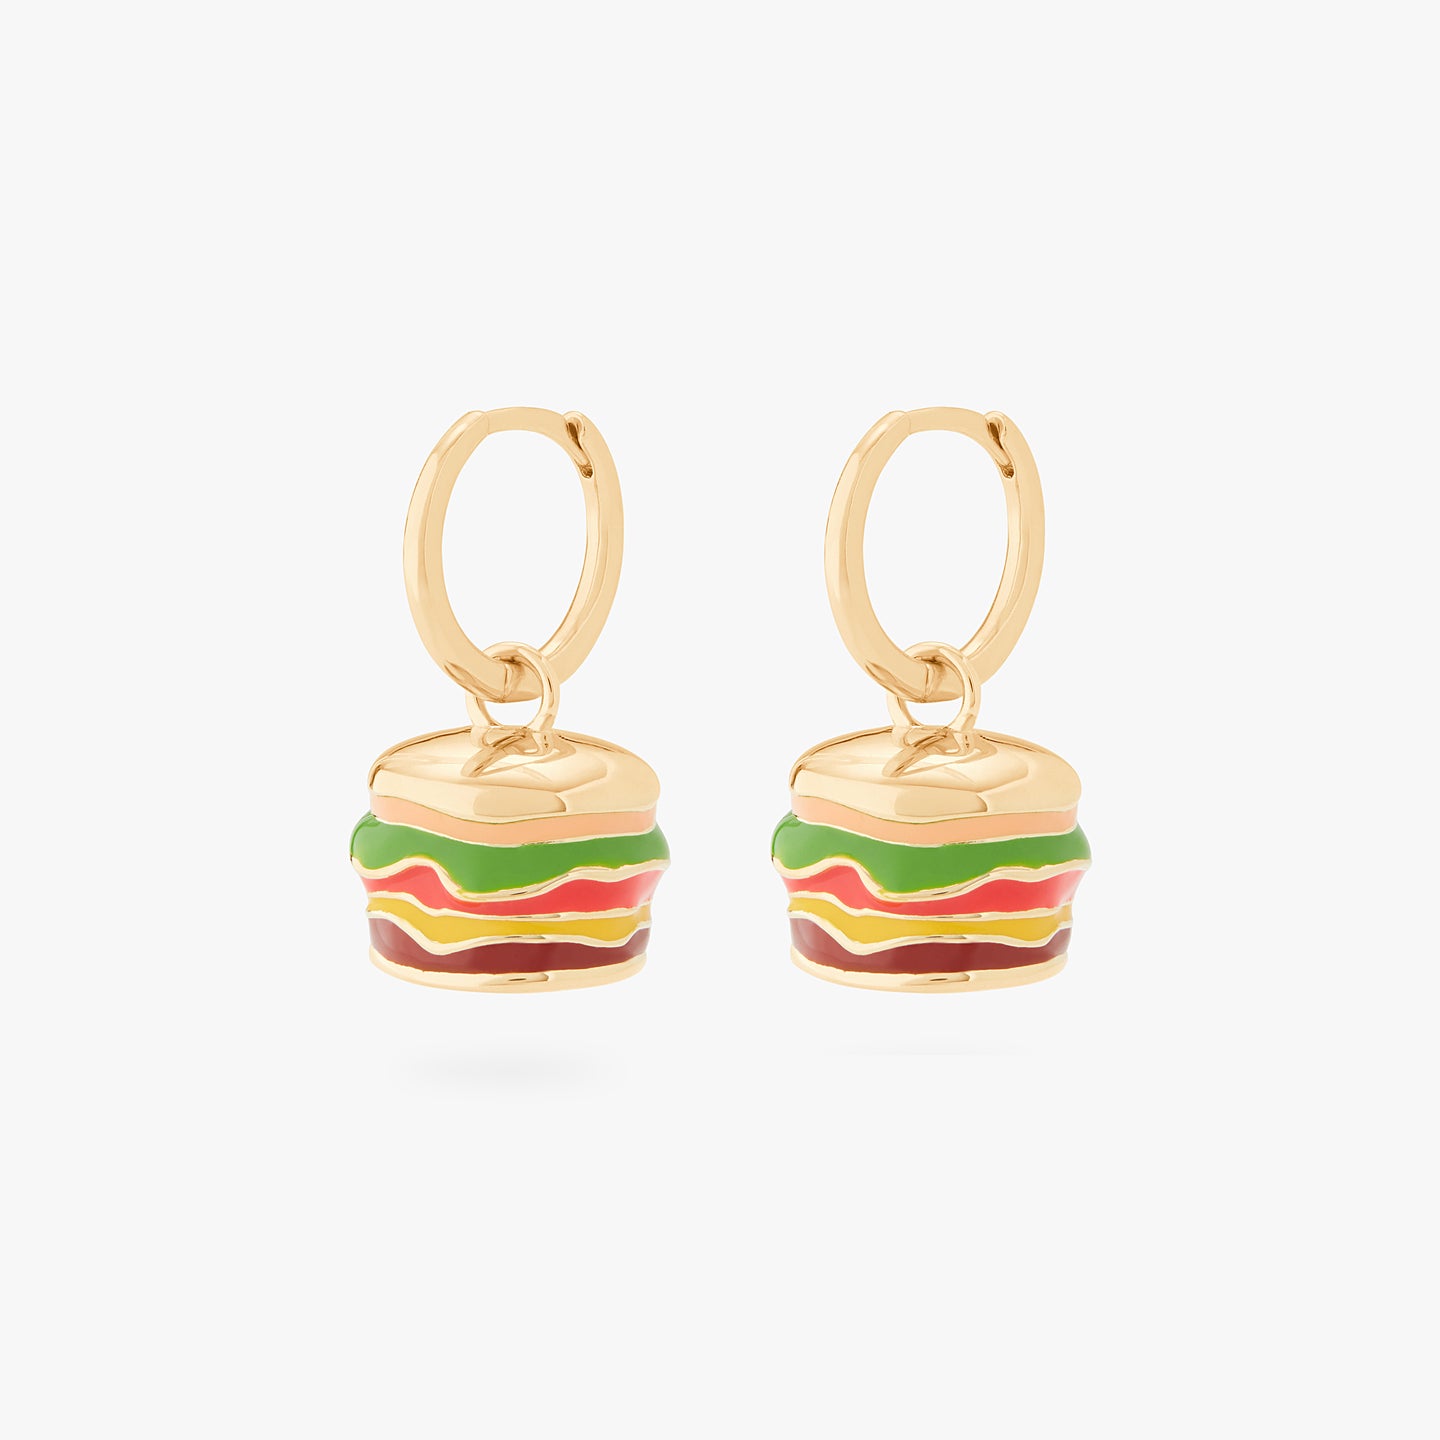 This is an image of a pair of burger-shaped, enameled charm huggies in gold created to look like Shake Shack Burgers. [pair] color:null|gold/clear